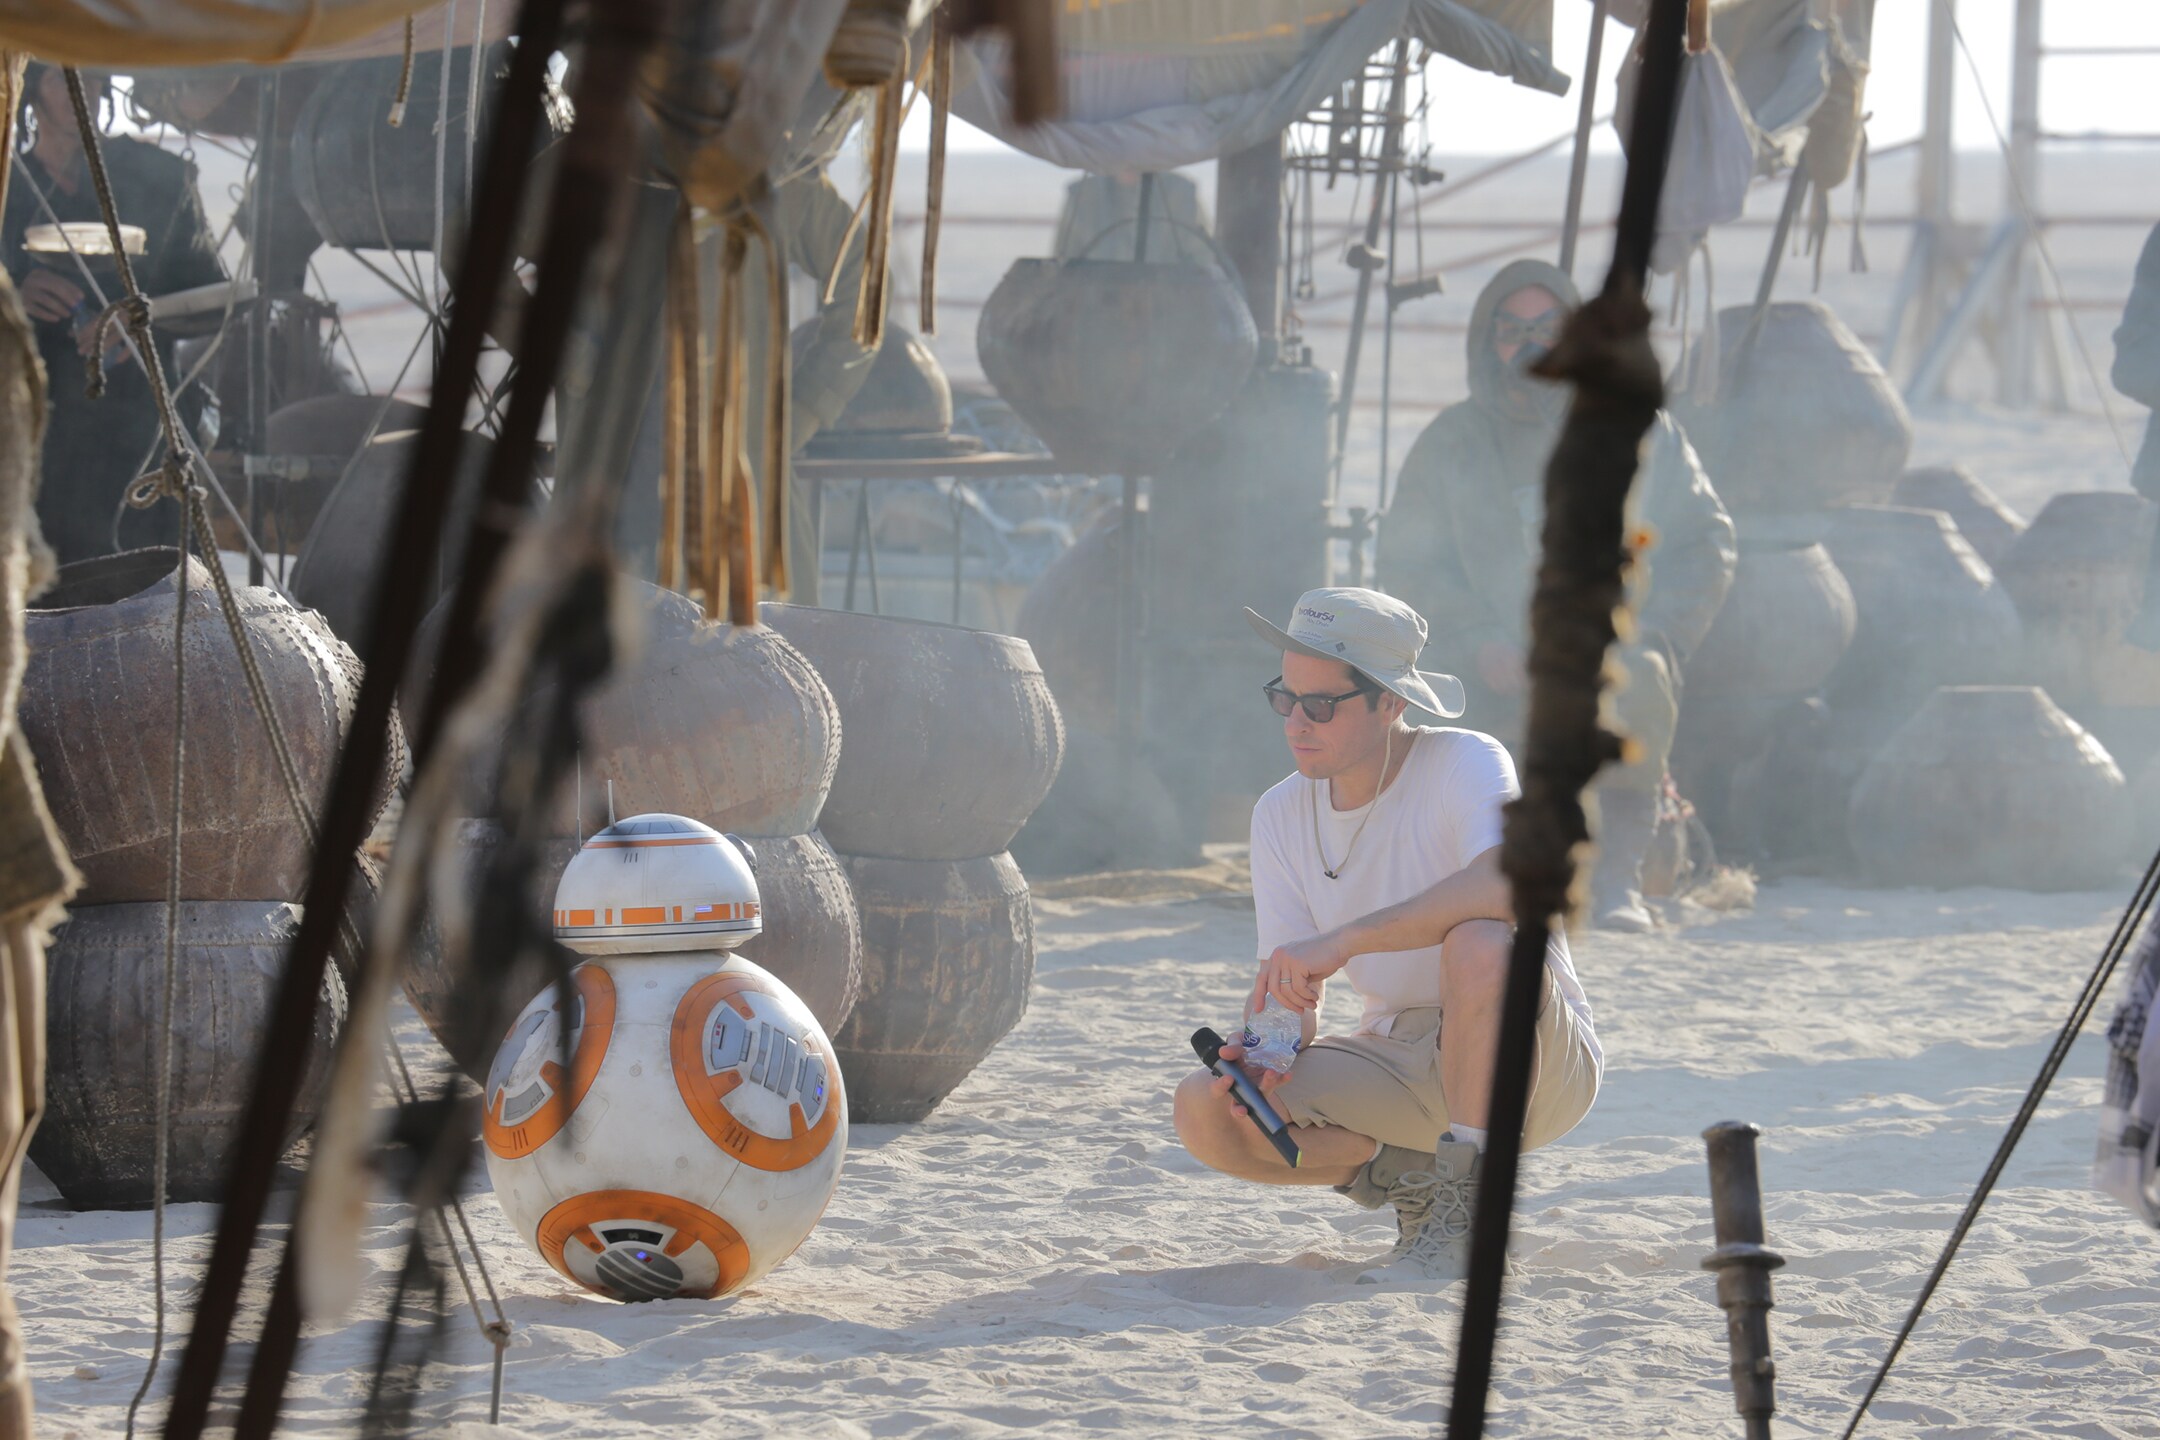 J.J. Abrams on the set of Star Wars: The Force Awakens with BB-8